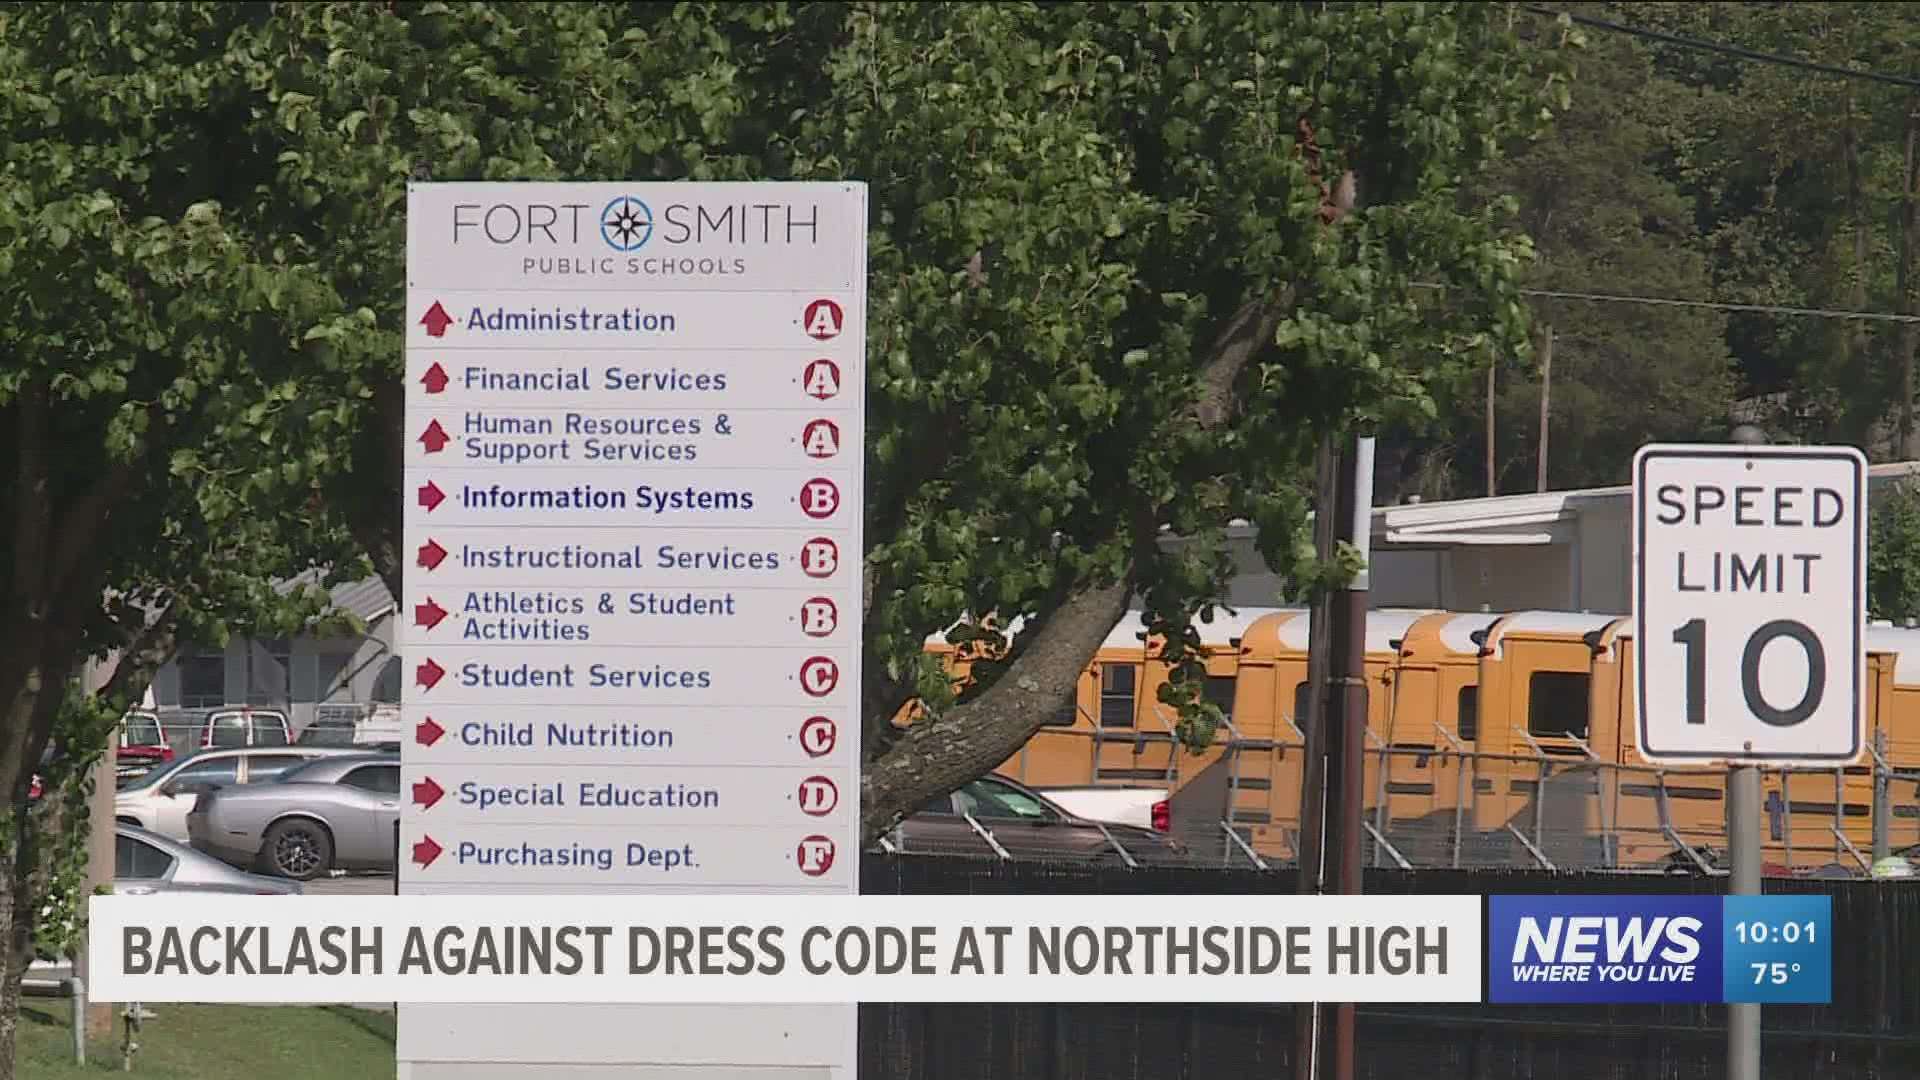 Fort Smith Public School Board held a meeting to discuss the dress code and featured students protesting airing their grievances.